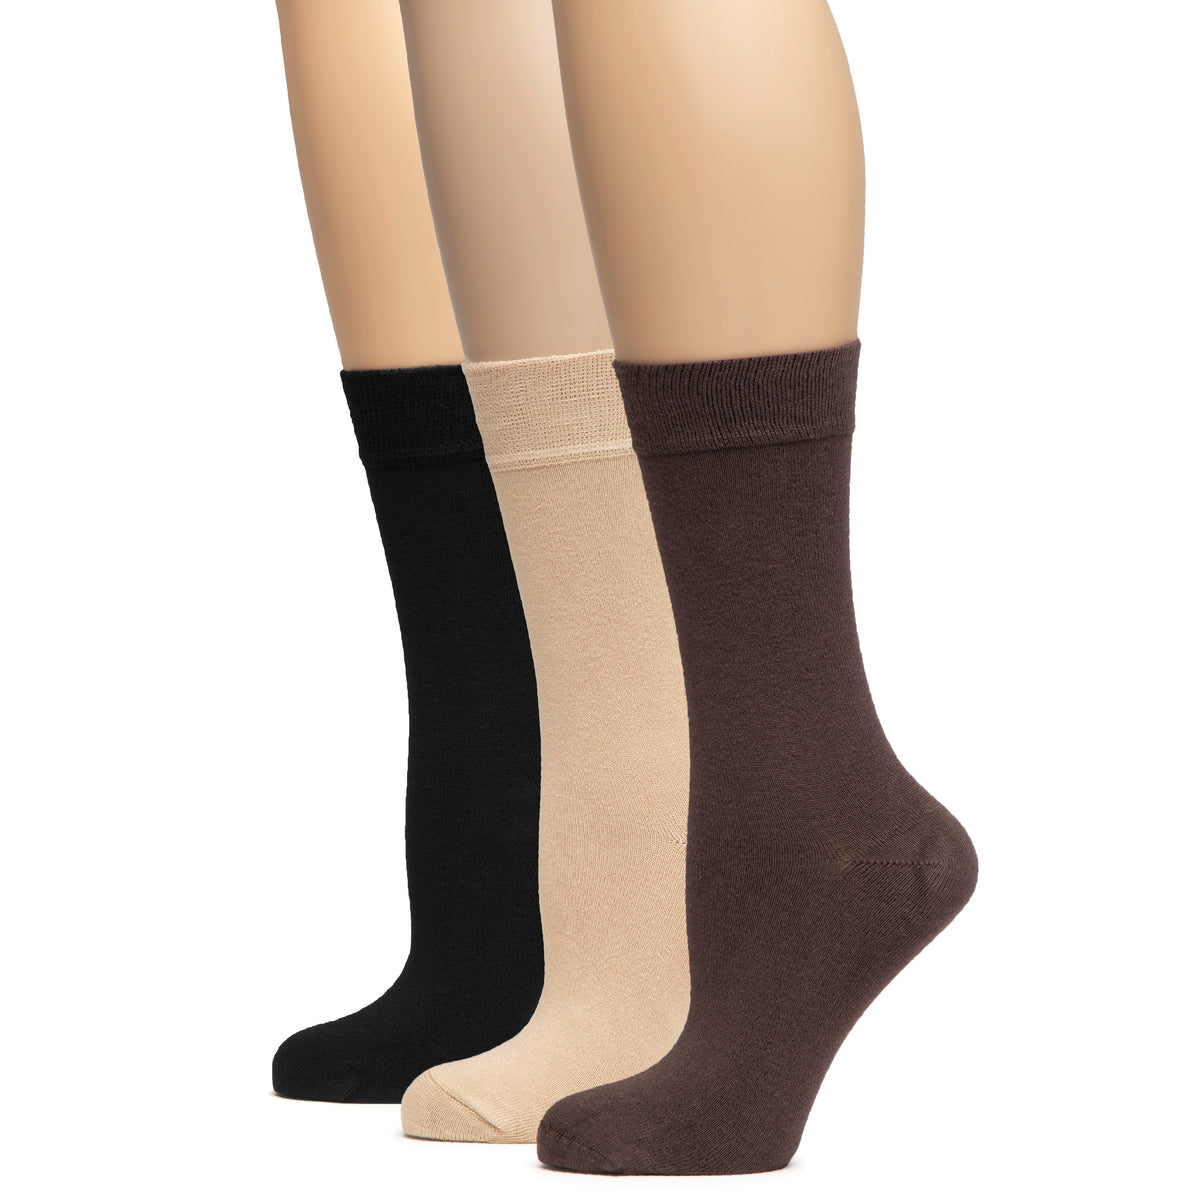 Stay cozy and stylish with these women's bamboo crew socks in black, brown, and tan. Perfect for any outfit or occasion.